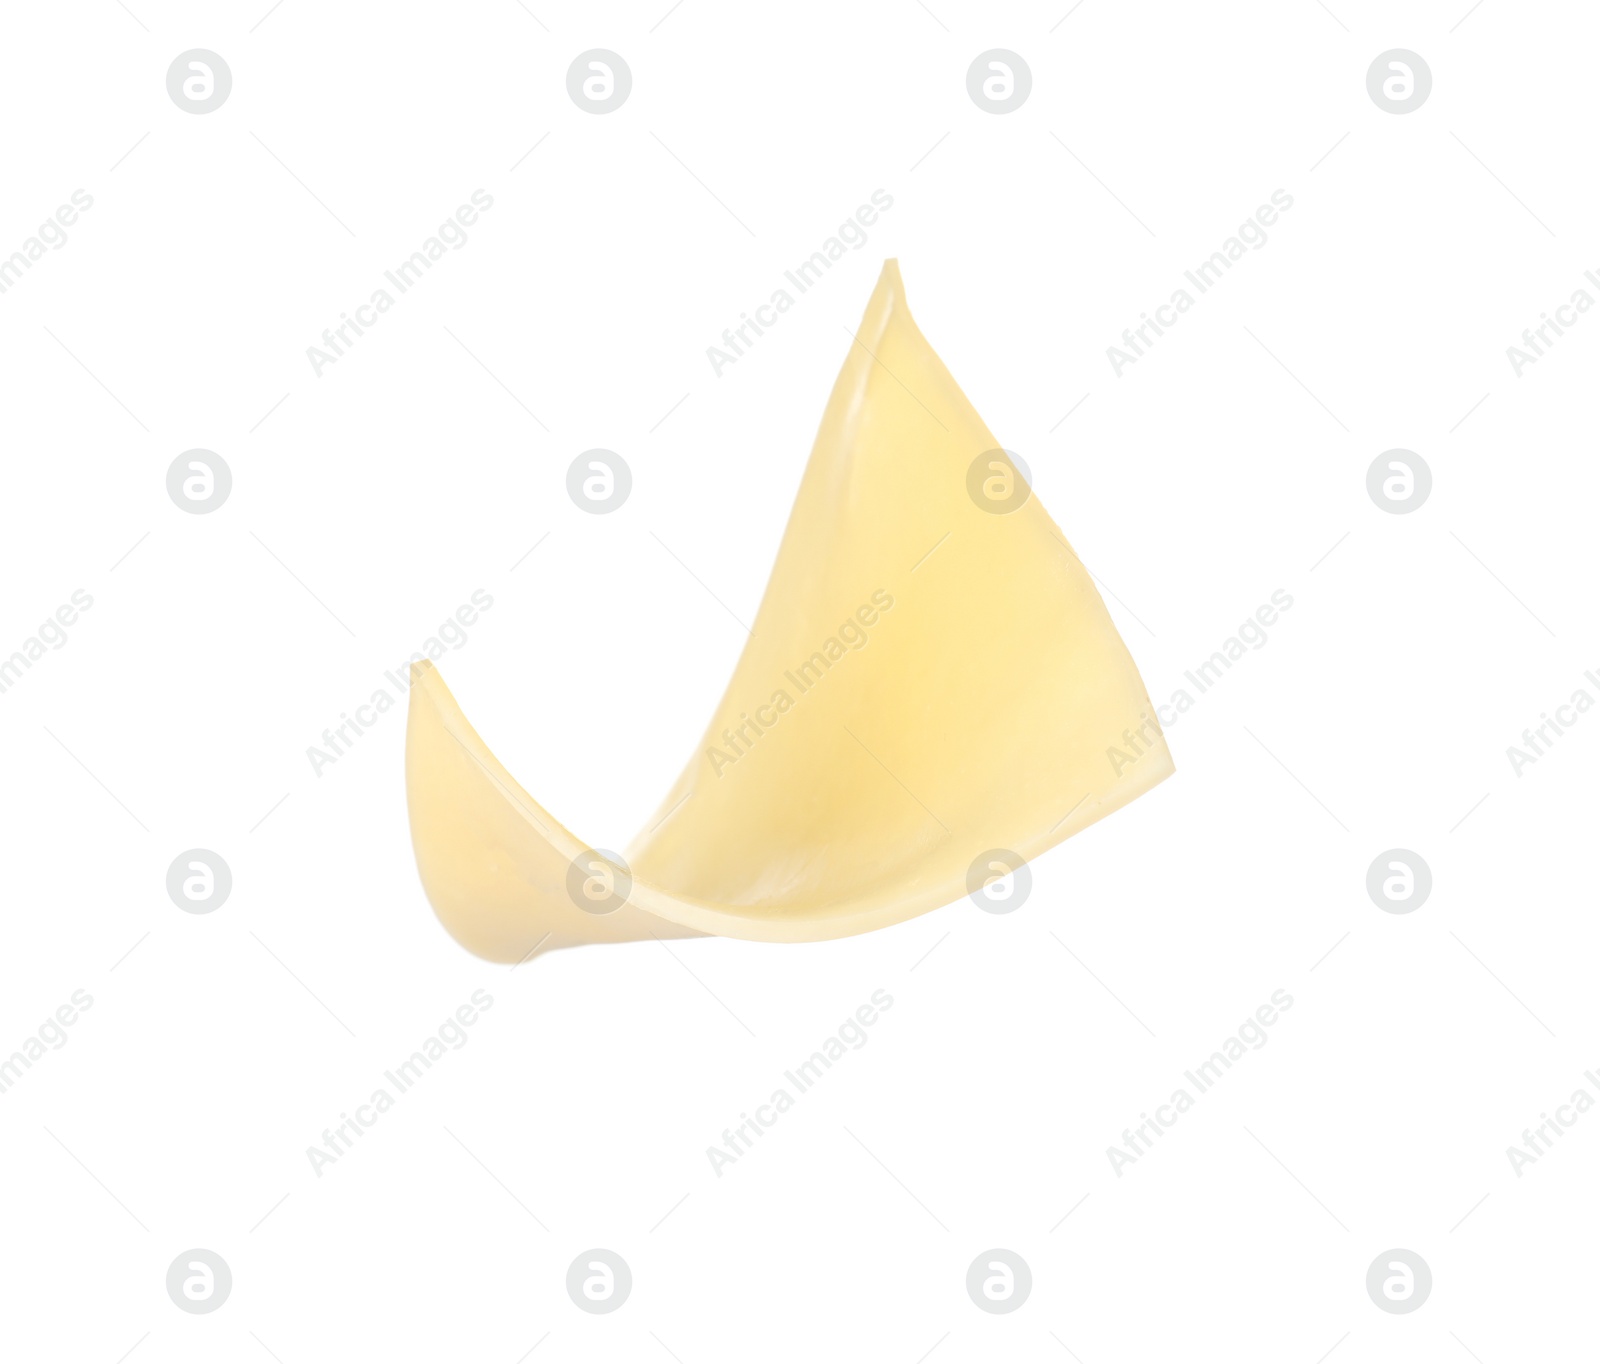 Photo of Slice of cheese for burger isolated on white